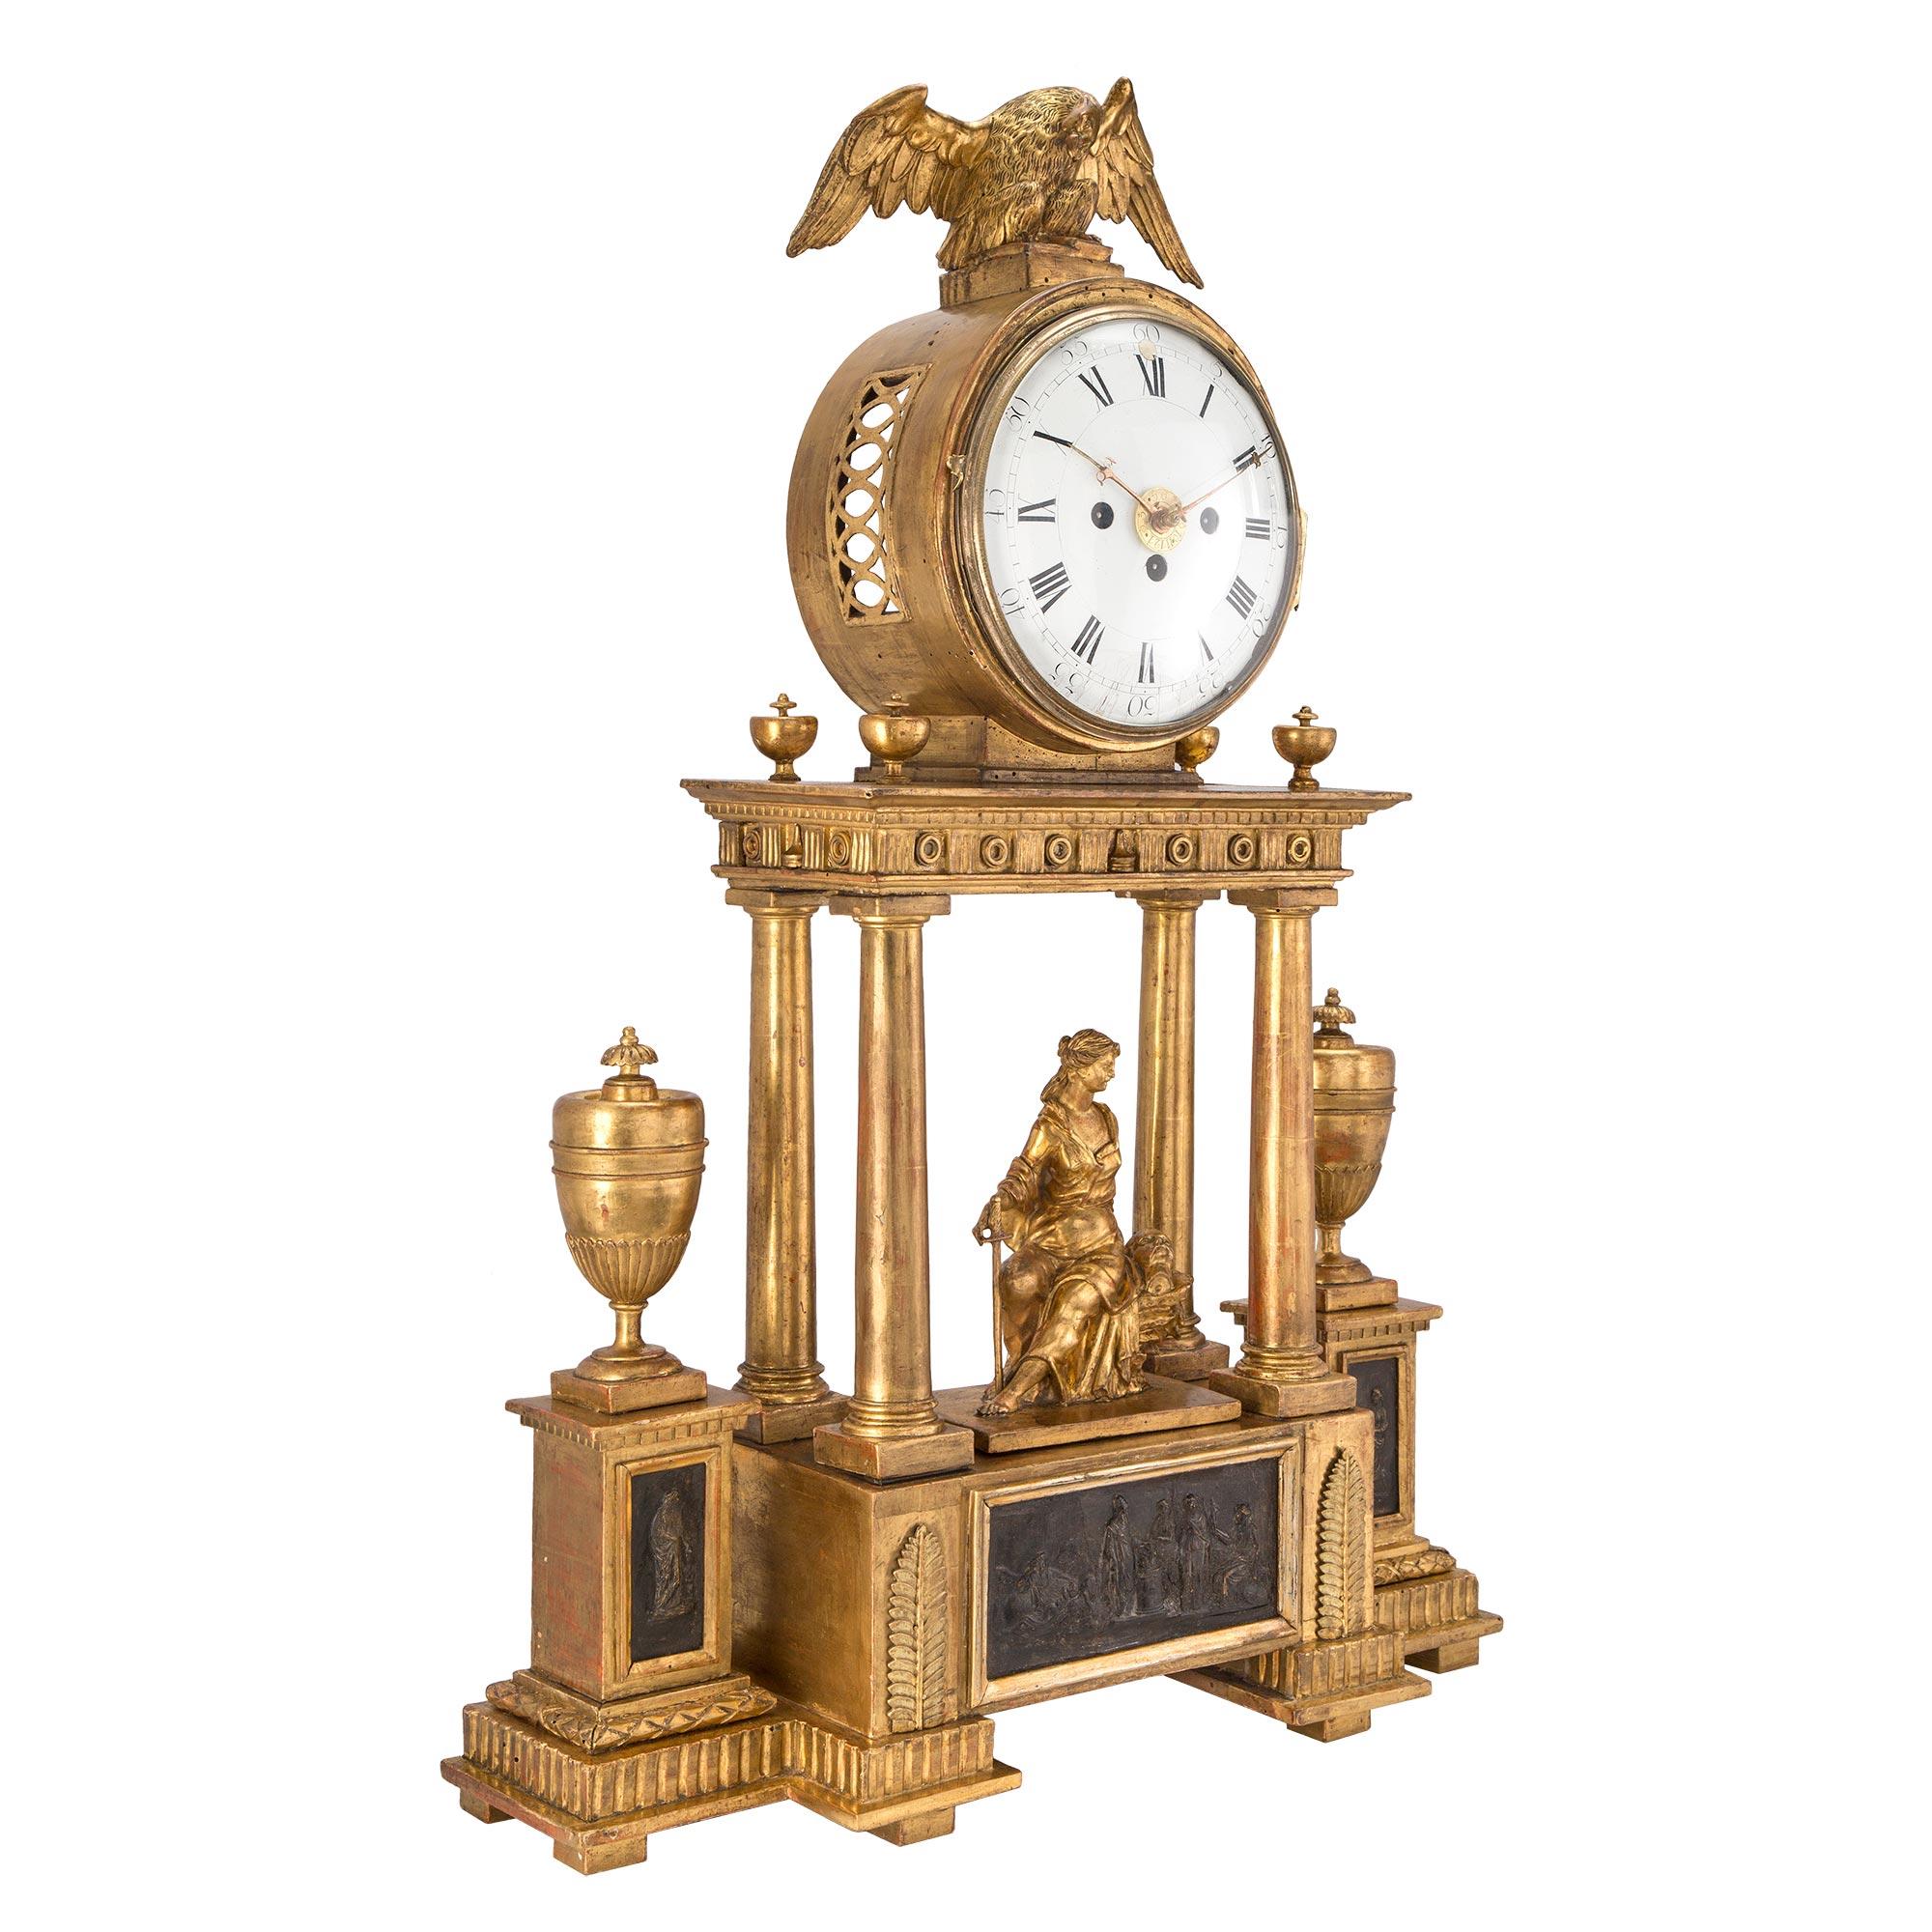 A handsome early 18th century Austrian giltwood and mecca blind mans clock. The clock , with two separate chimes, one for quarter hour and the other for hour. Raised on a solid base with pedestals on each side displaying a mecca plaque supporting an